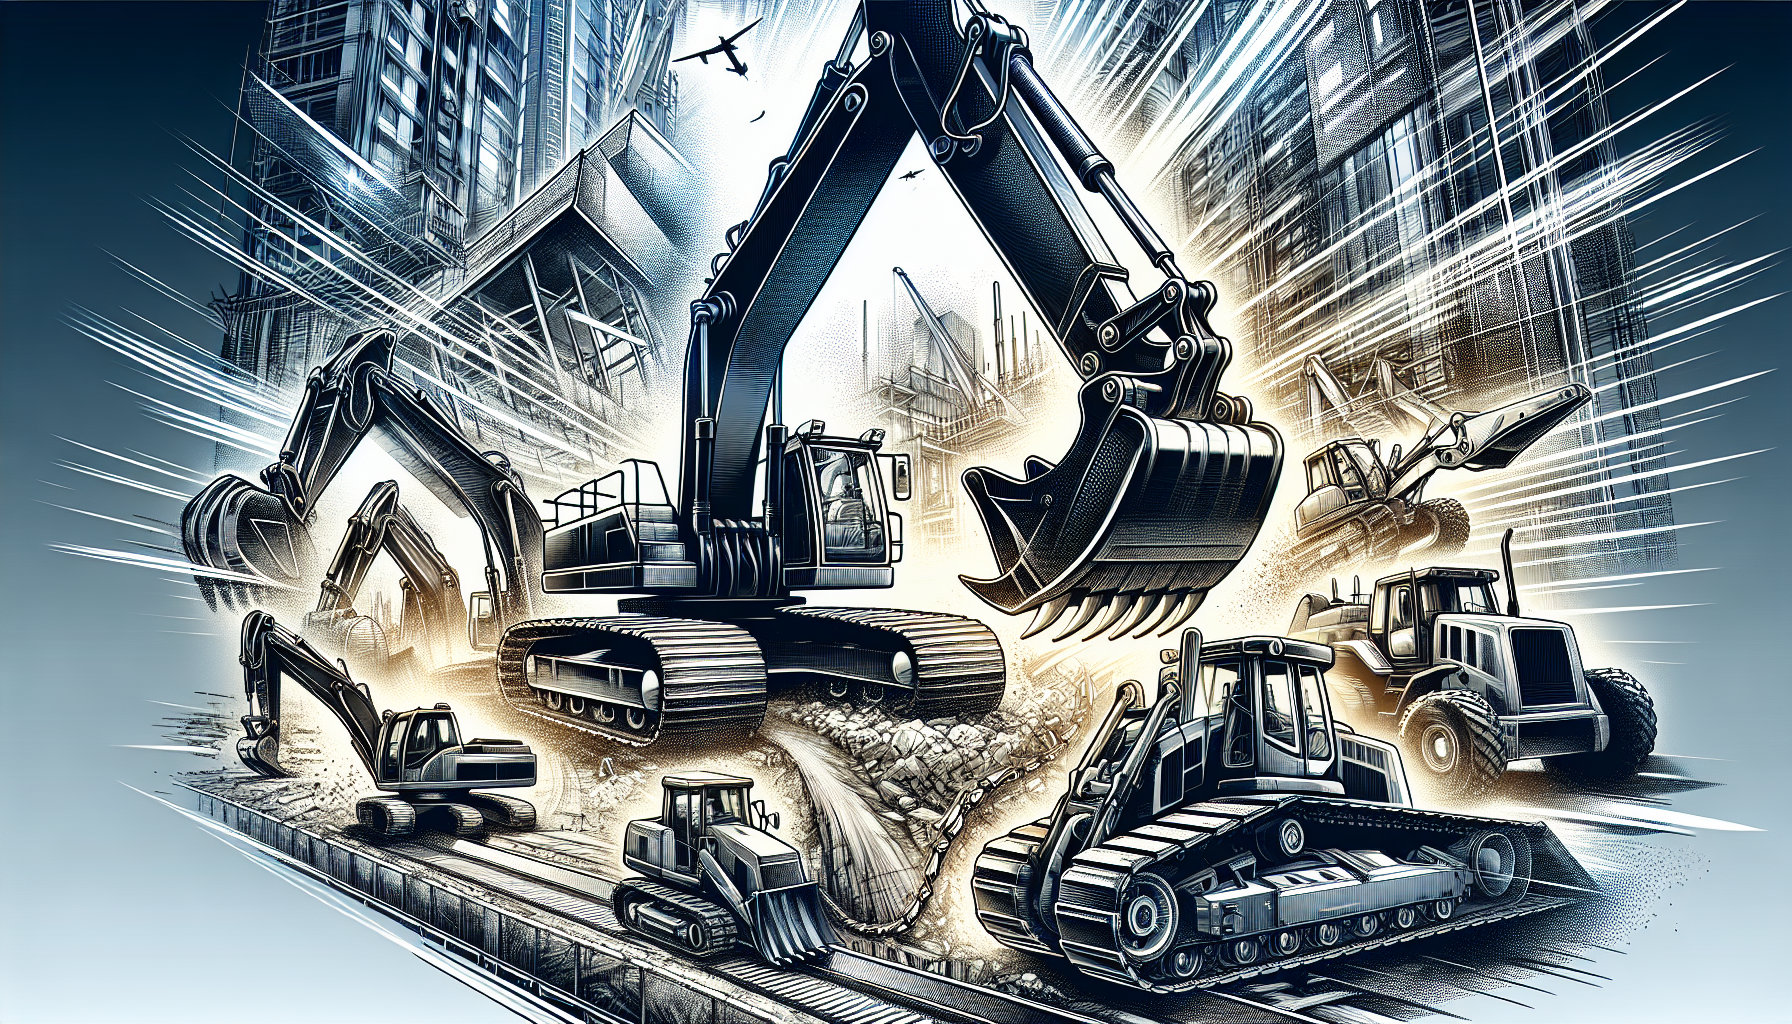 Illustration of various heavy equipment used in the construction industry